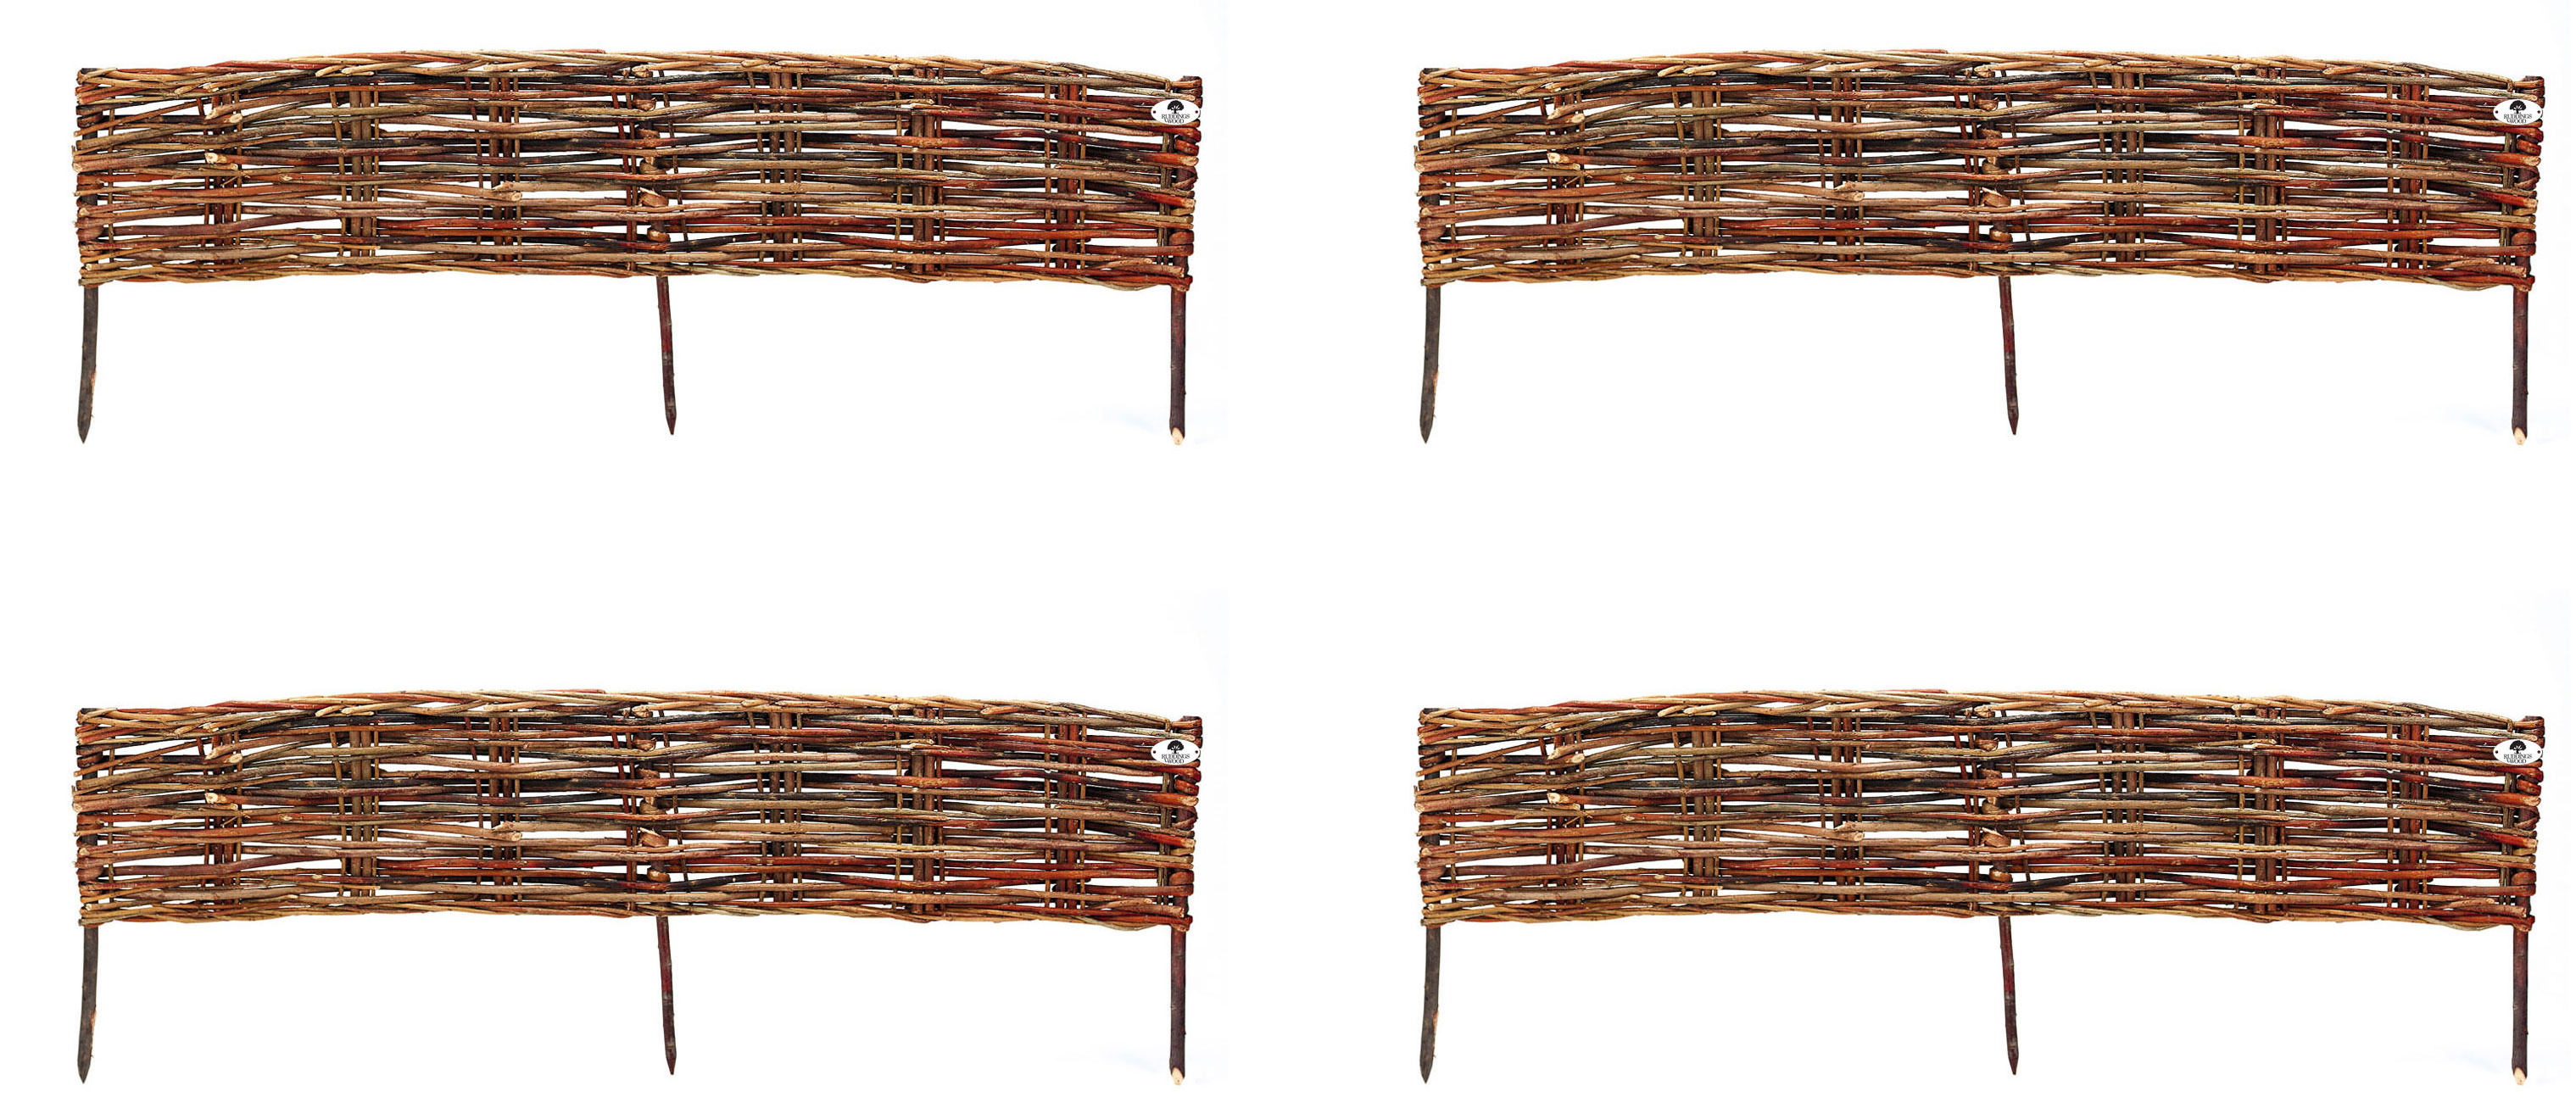 Pack of 4 Traditional Willow Garden Border Hurdle Edging 120cm x 35cm